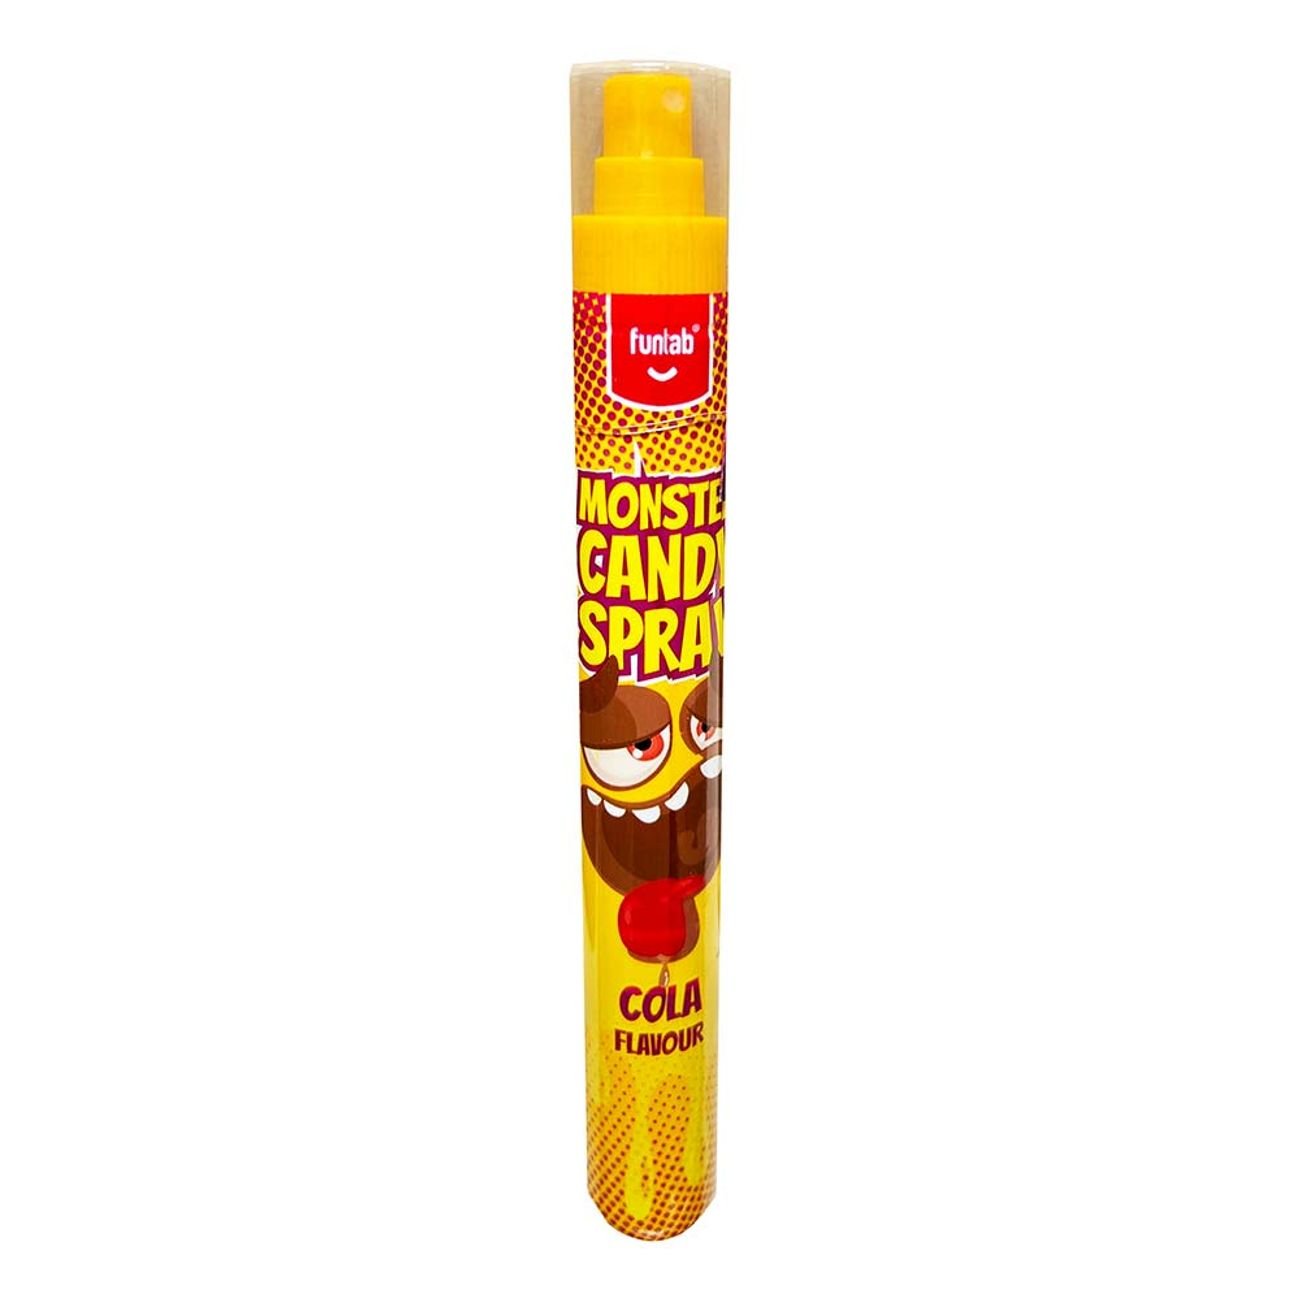 monster-candy-spray-cola-92901-1